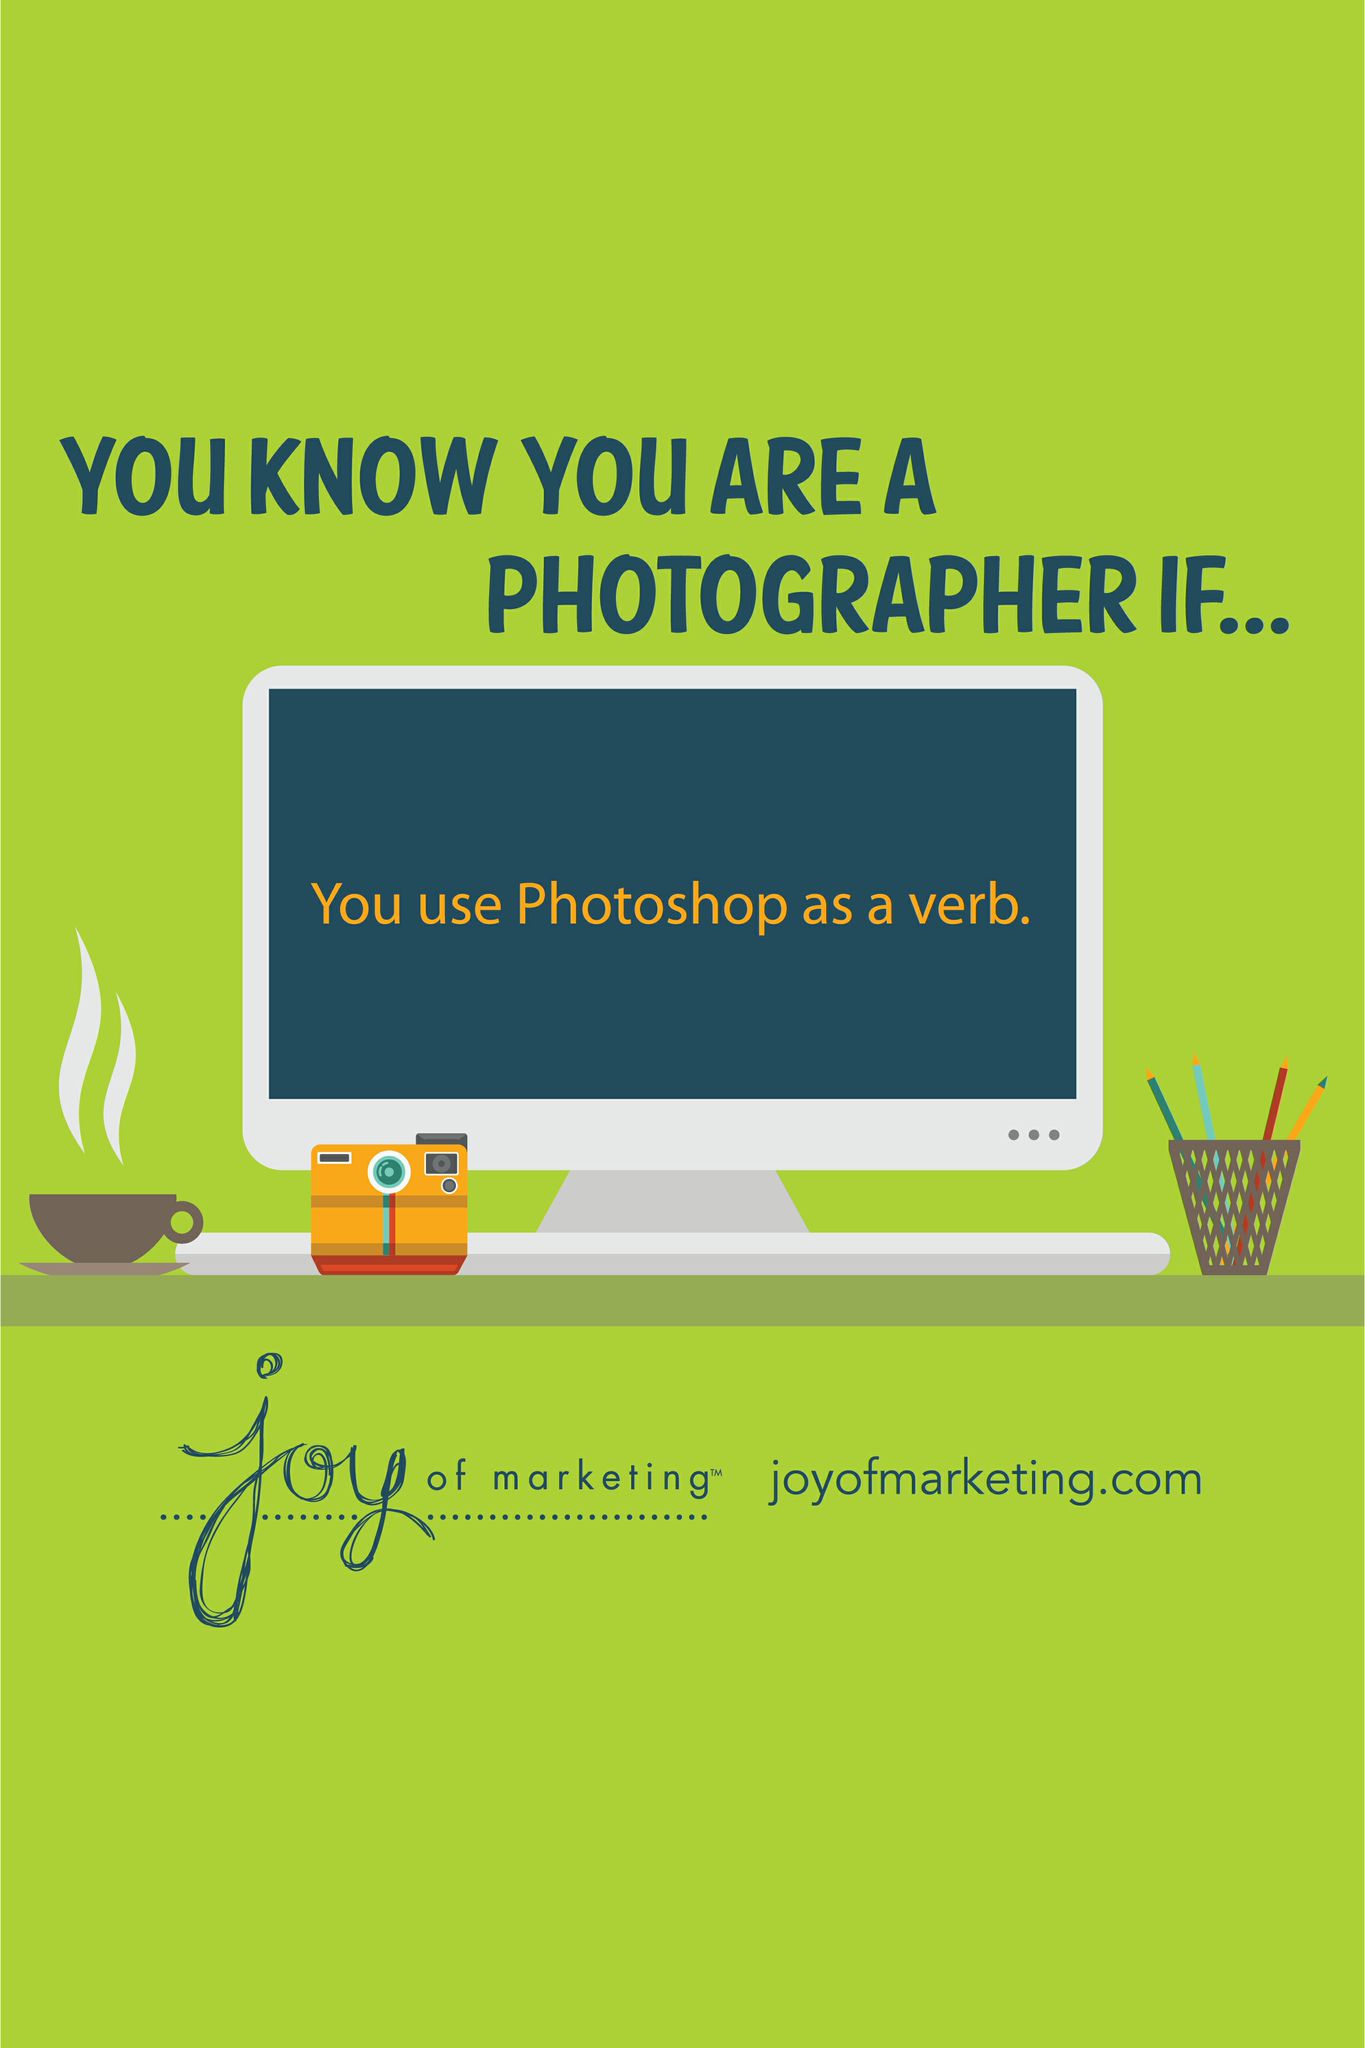 10 Ways You Know You’re a Professional Photographer